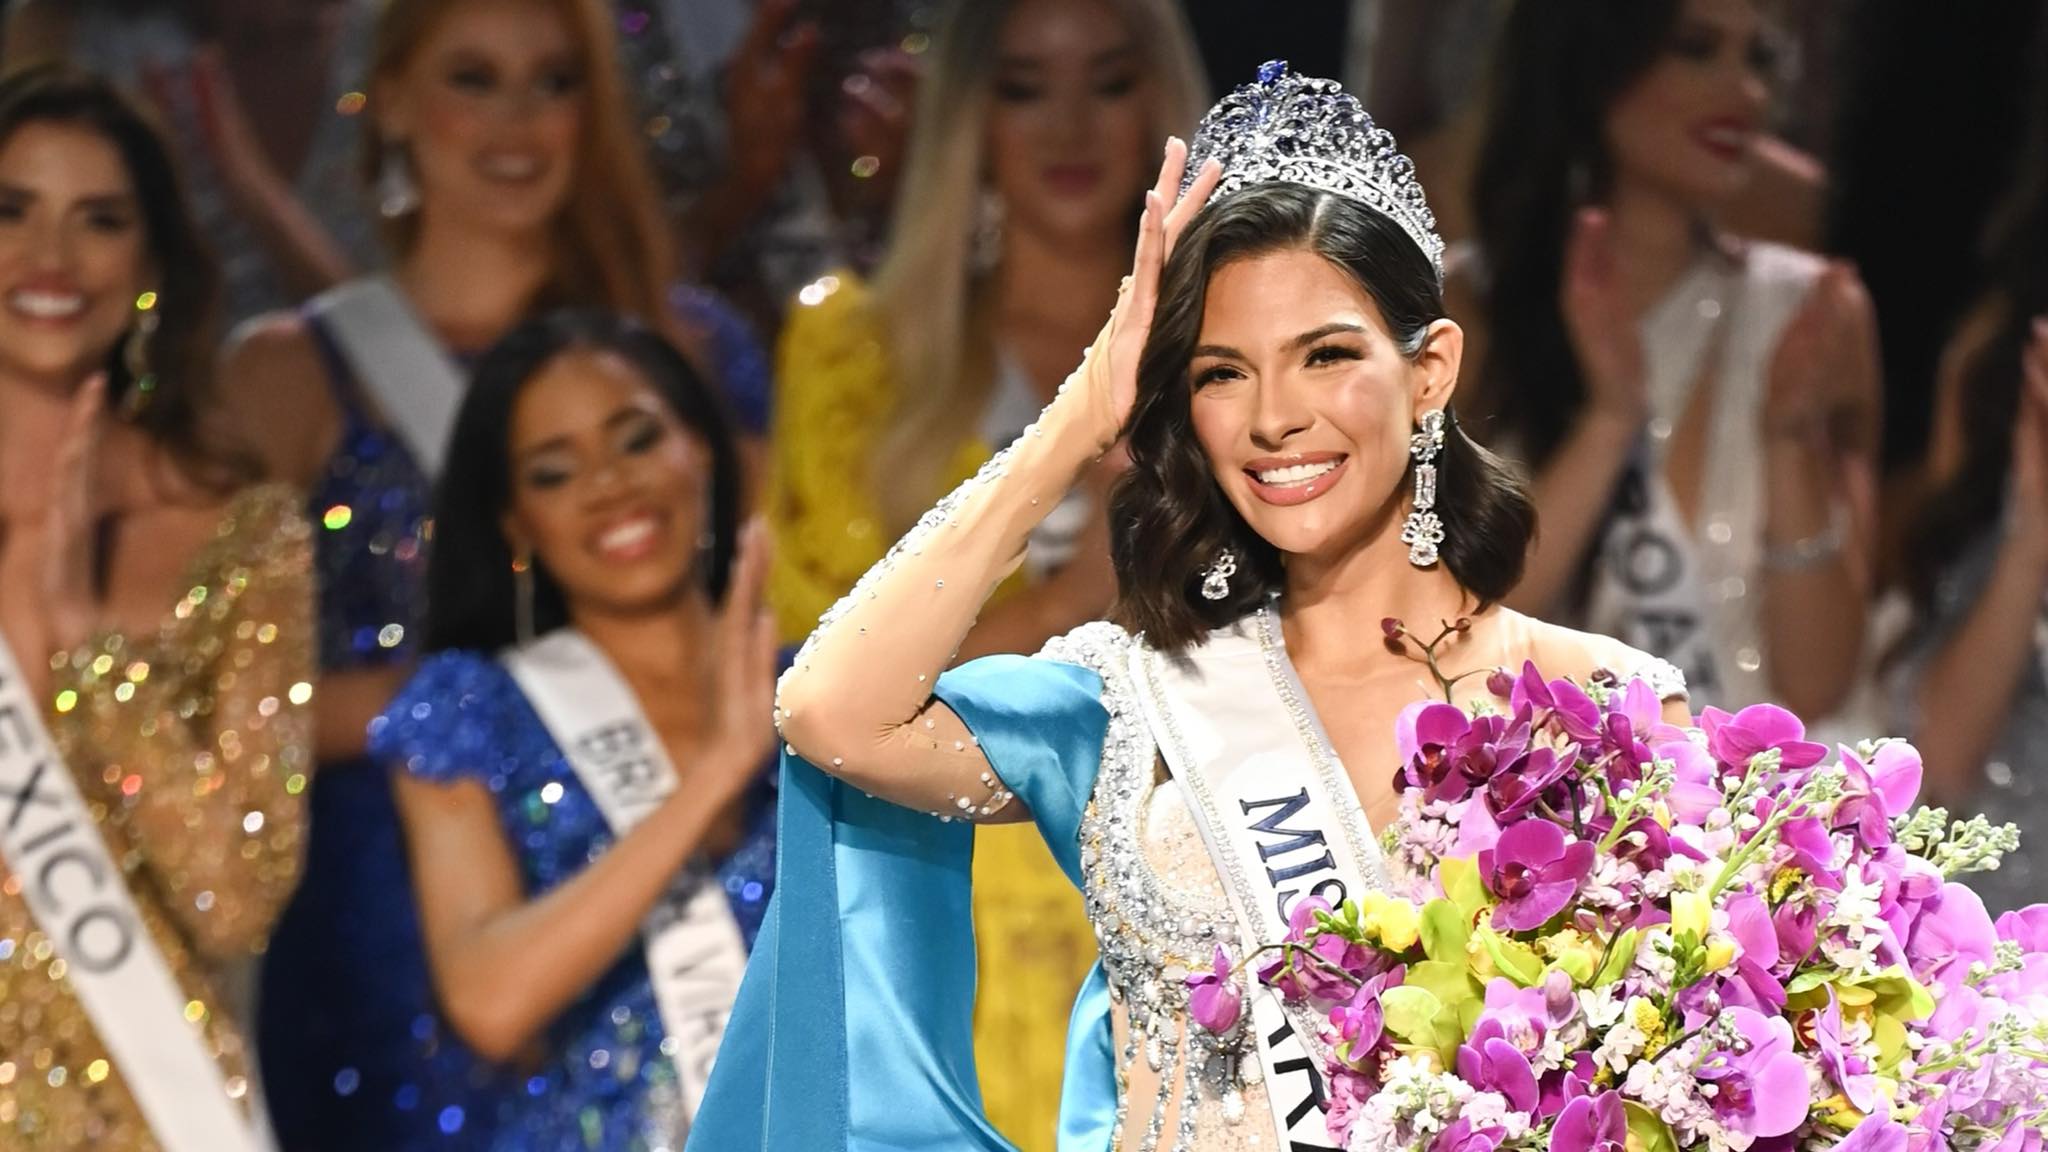 Featured image for “Nicaragua’s Sheynnis Palacios Makes History as Miss Universe 2023”